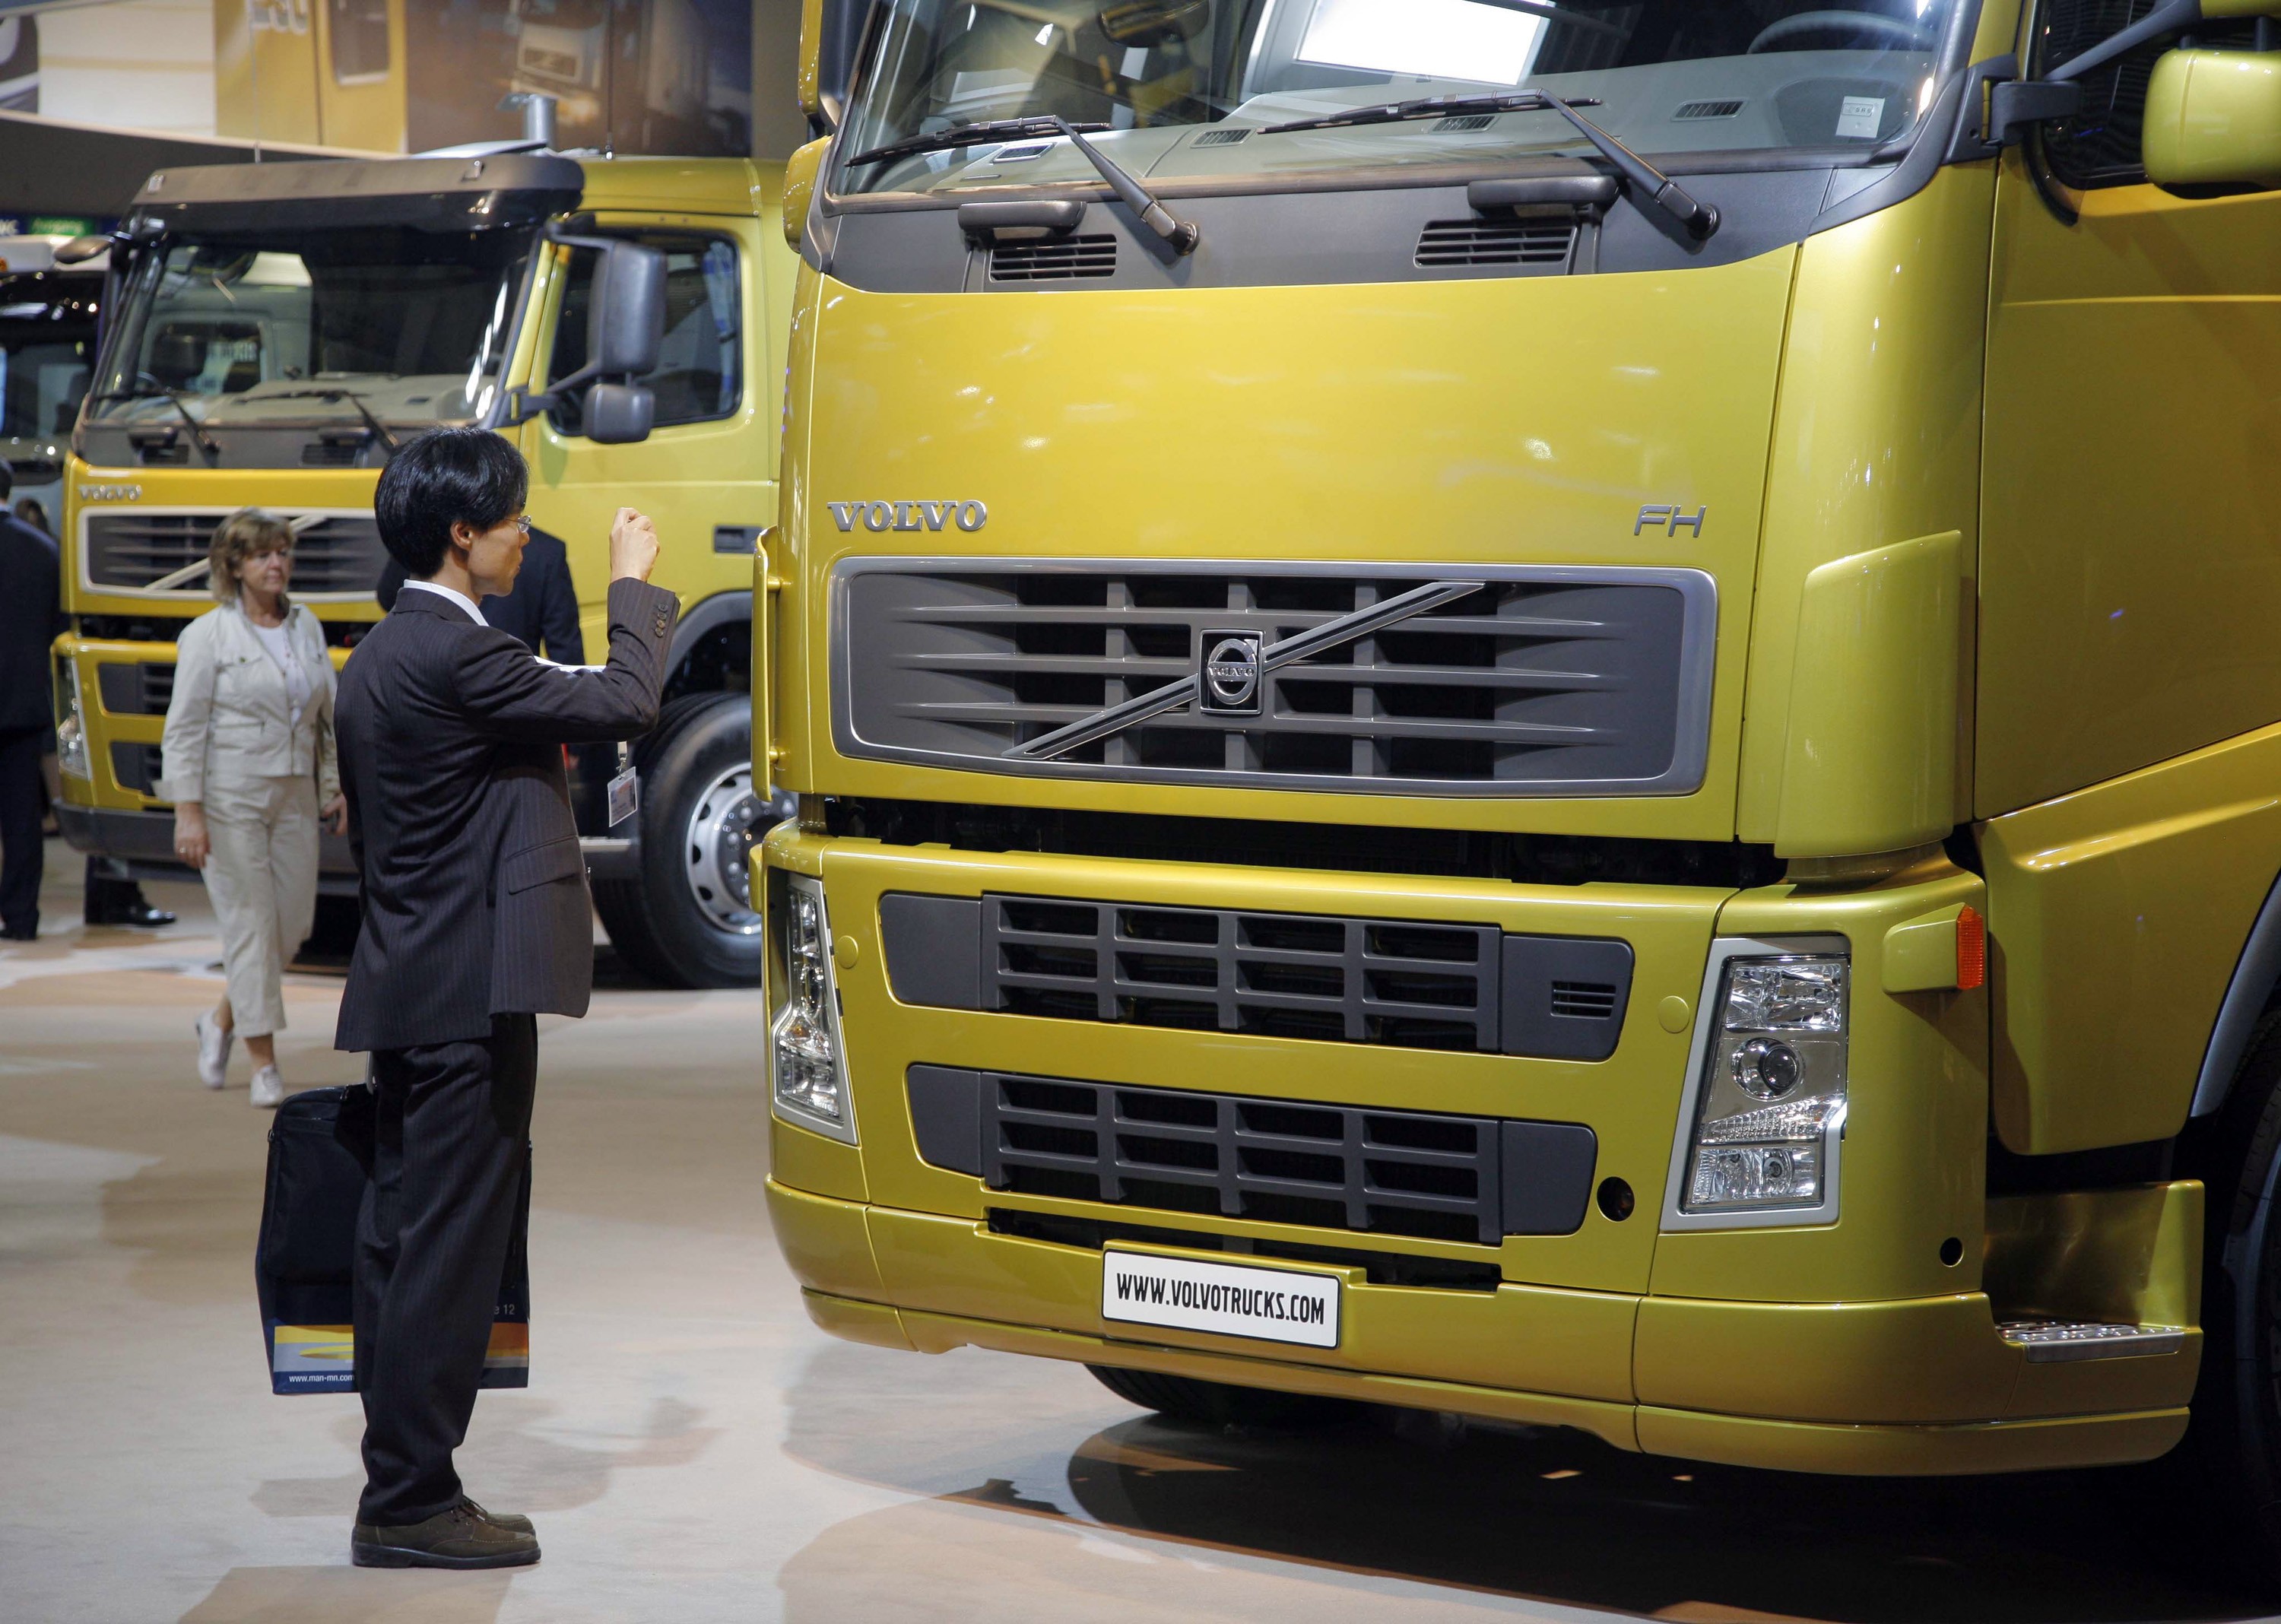 A visitor looks at a Volvo truck at the IAA Commercial Vehicles Show in Hanover, Germany on September 20 last year. Photo: Bloomberg News